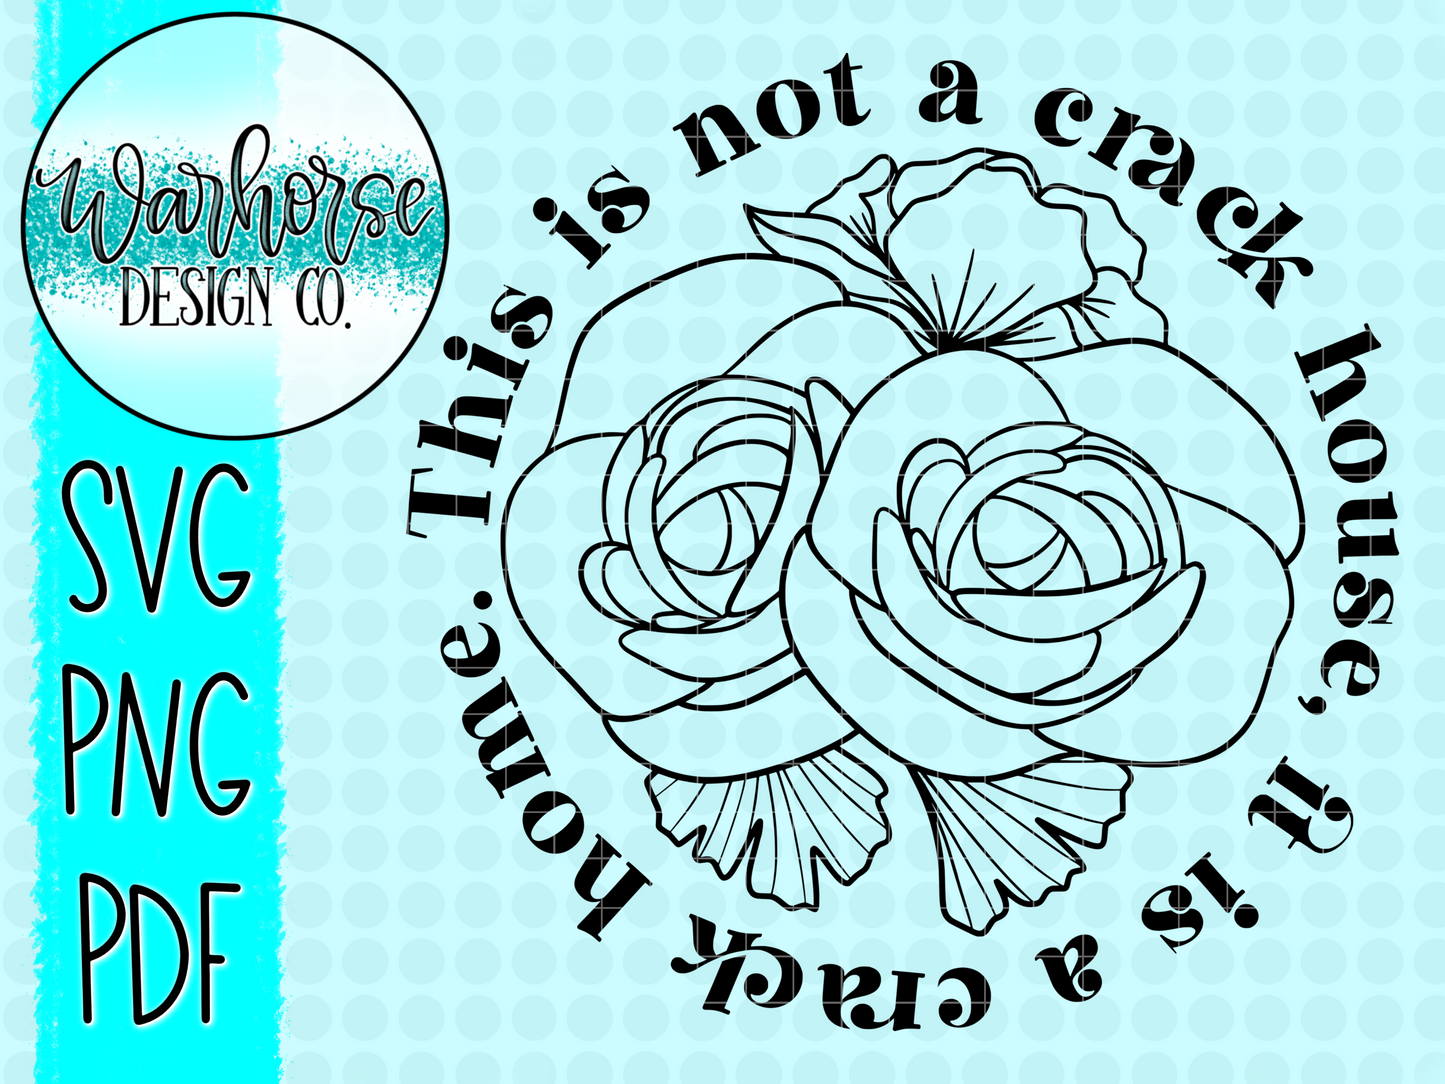 This is not a crack house SVG PNG PDF